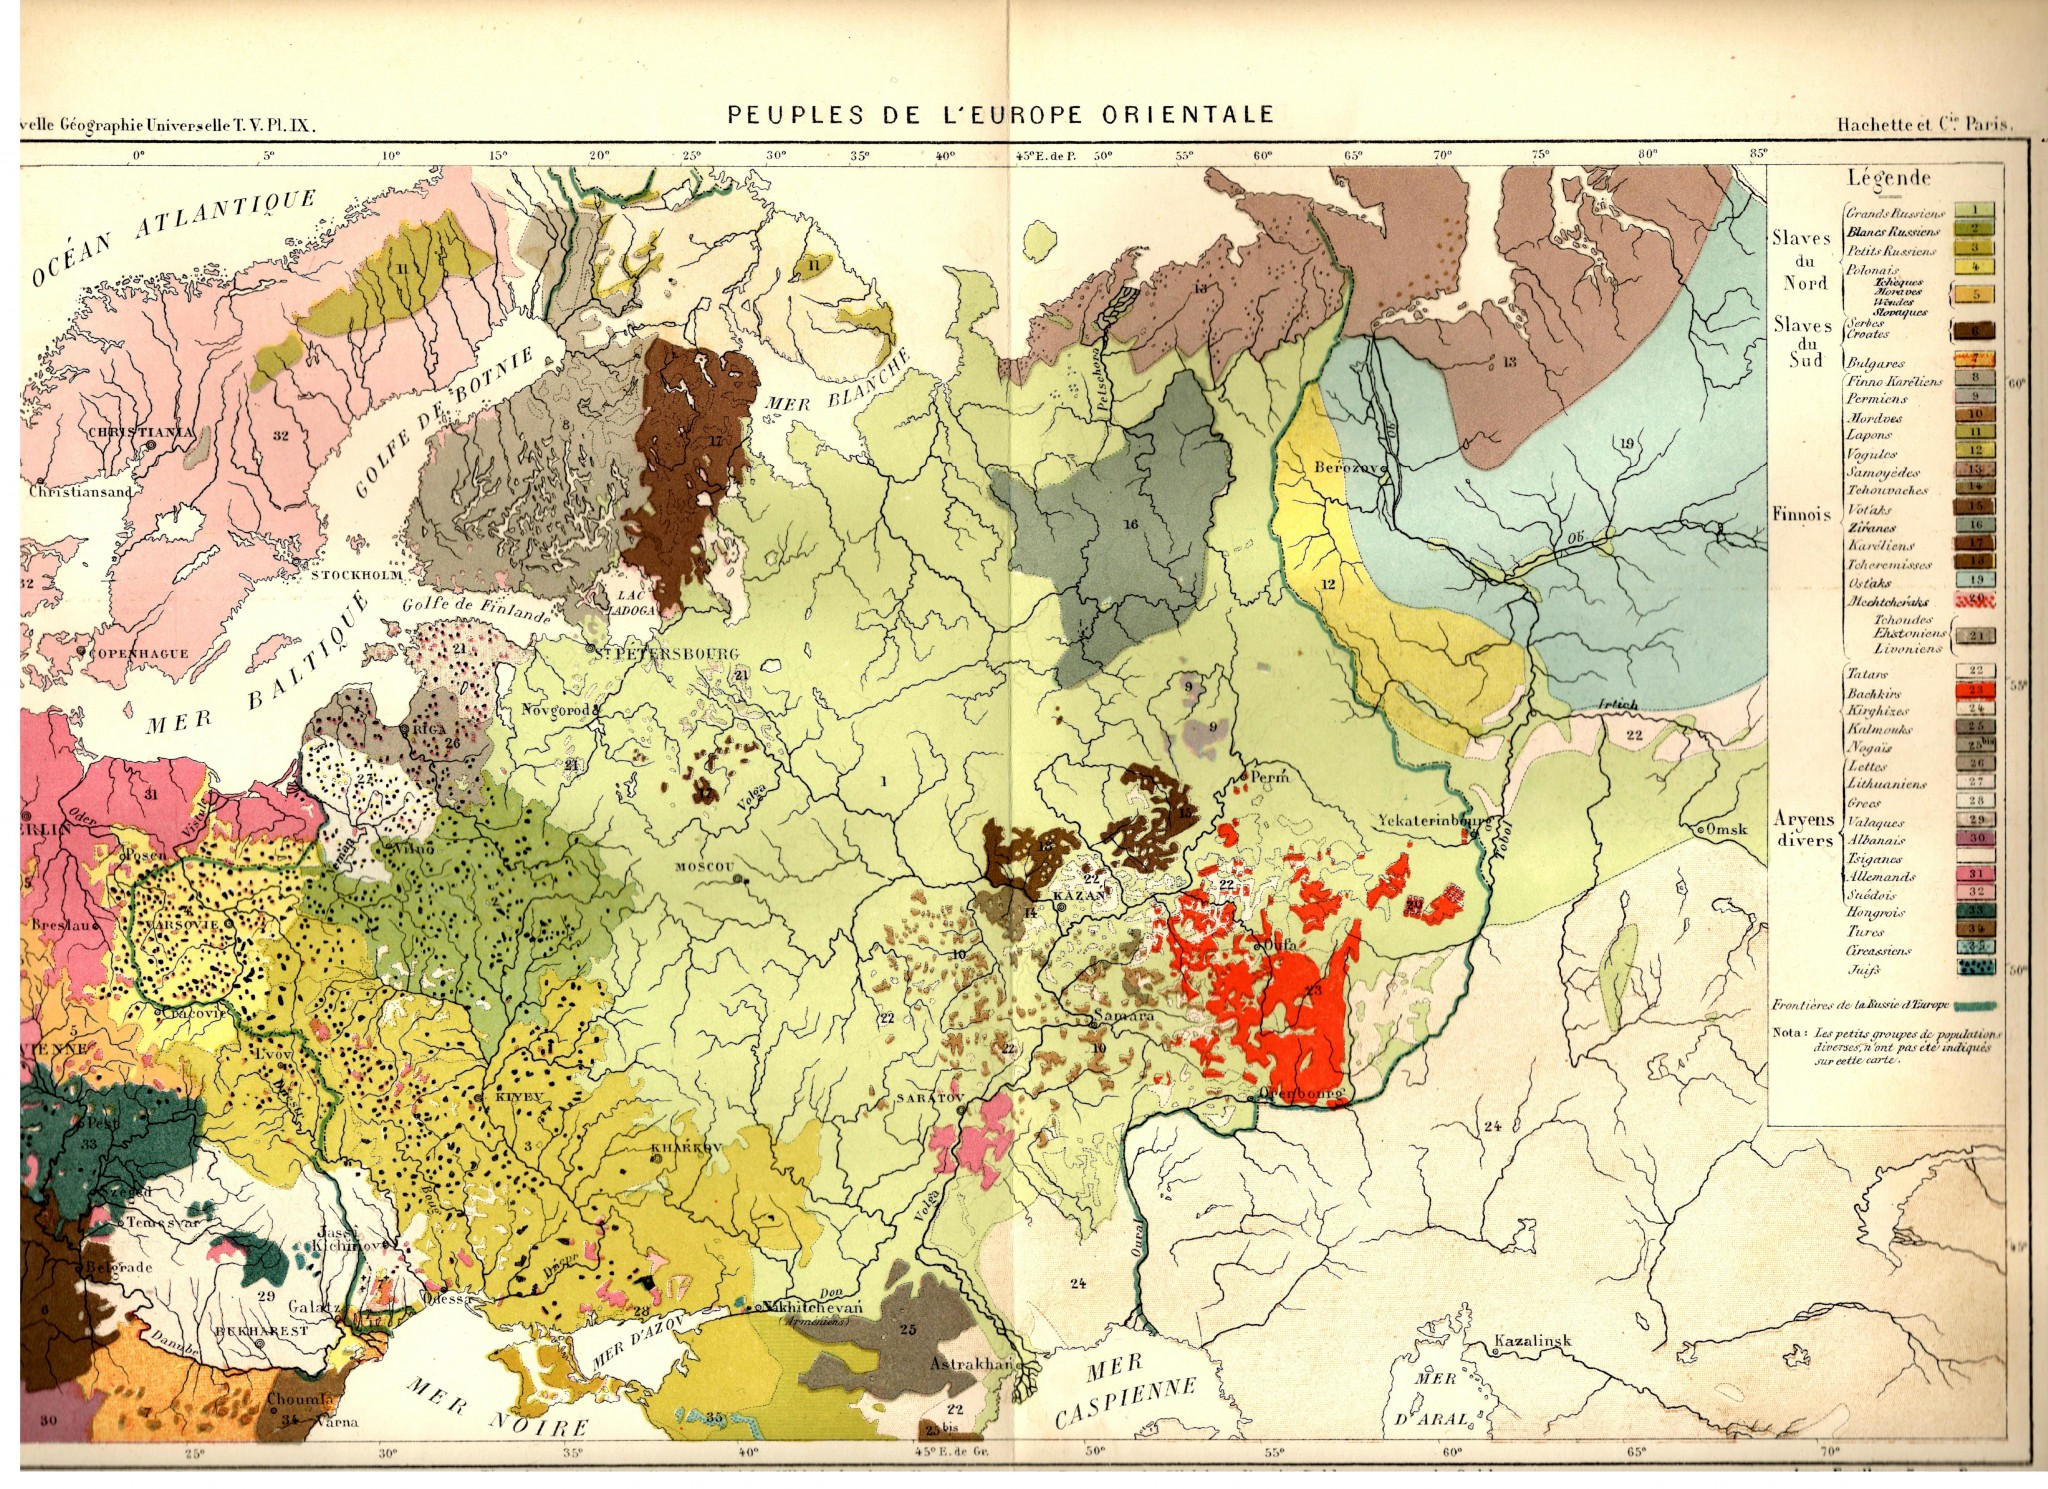 The Map of Ethnicities of the Eastern Europe (1879) by Hachette & Co, Paris. Note that the map legend shows Ukrainians under the term "Petits Russiens (3)."